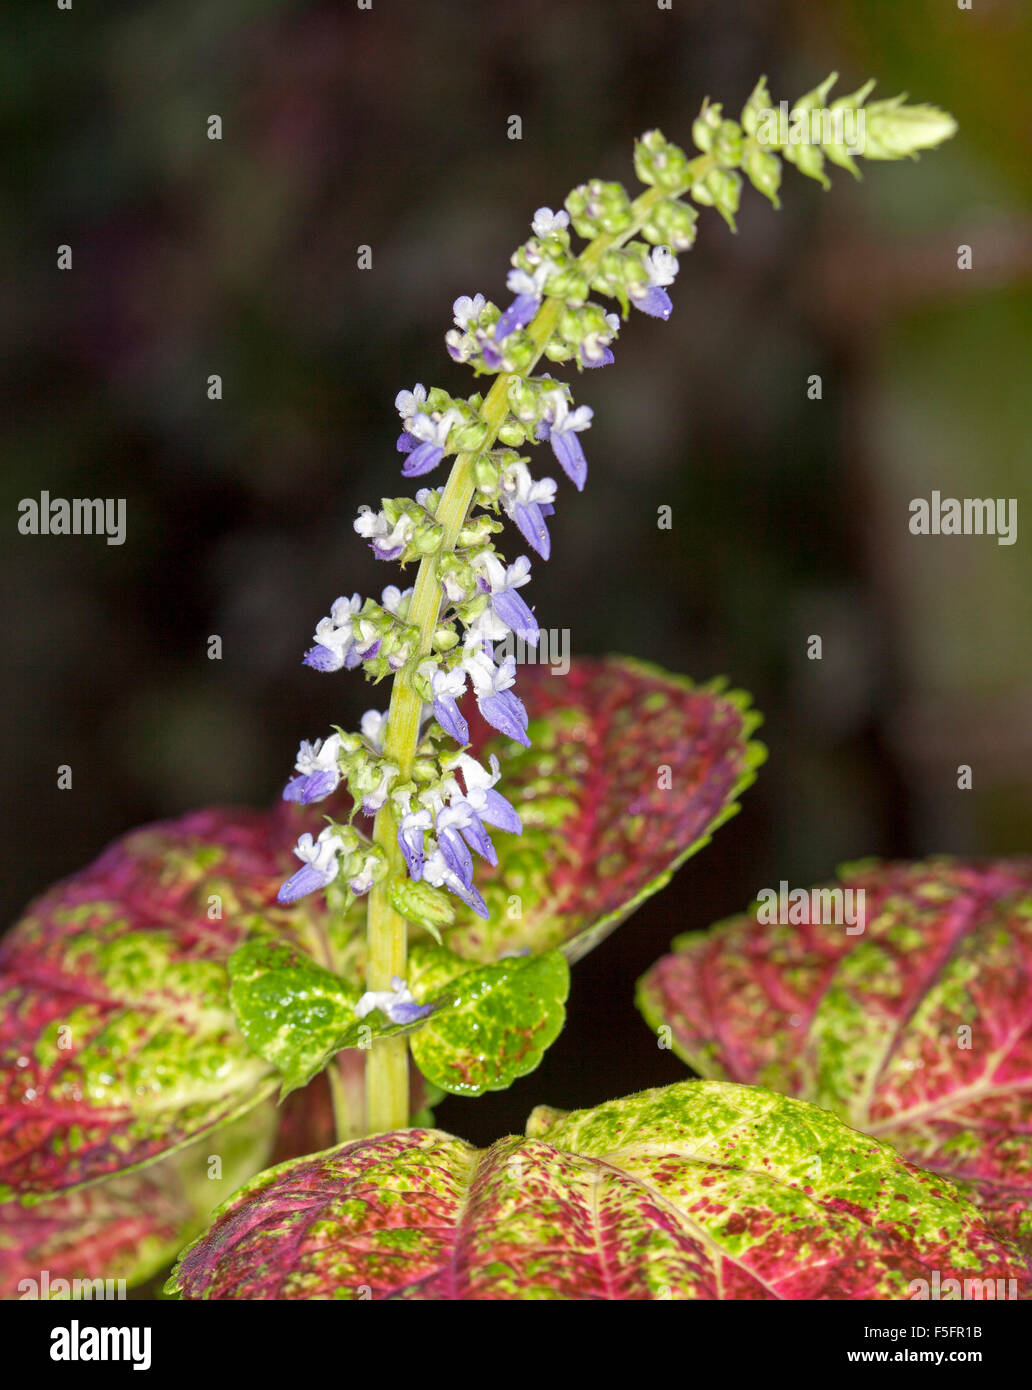 Stem of small blue flowers of coleus, Solenostemon, surrounded by variegated red, green & yellow leaves against dark background Stock Photo